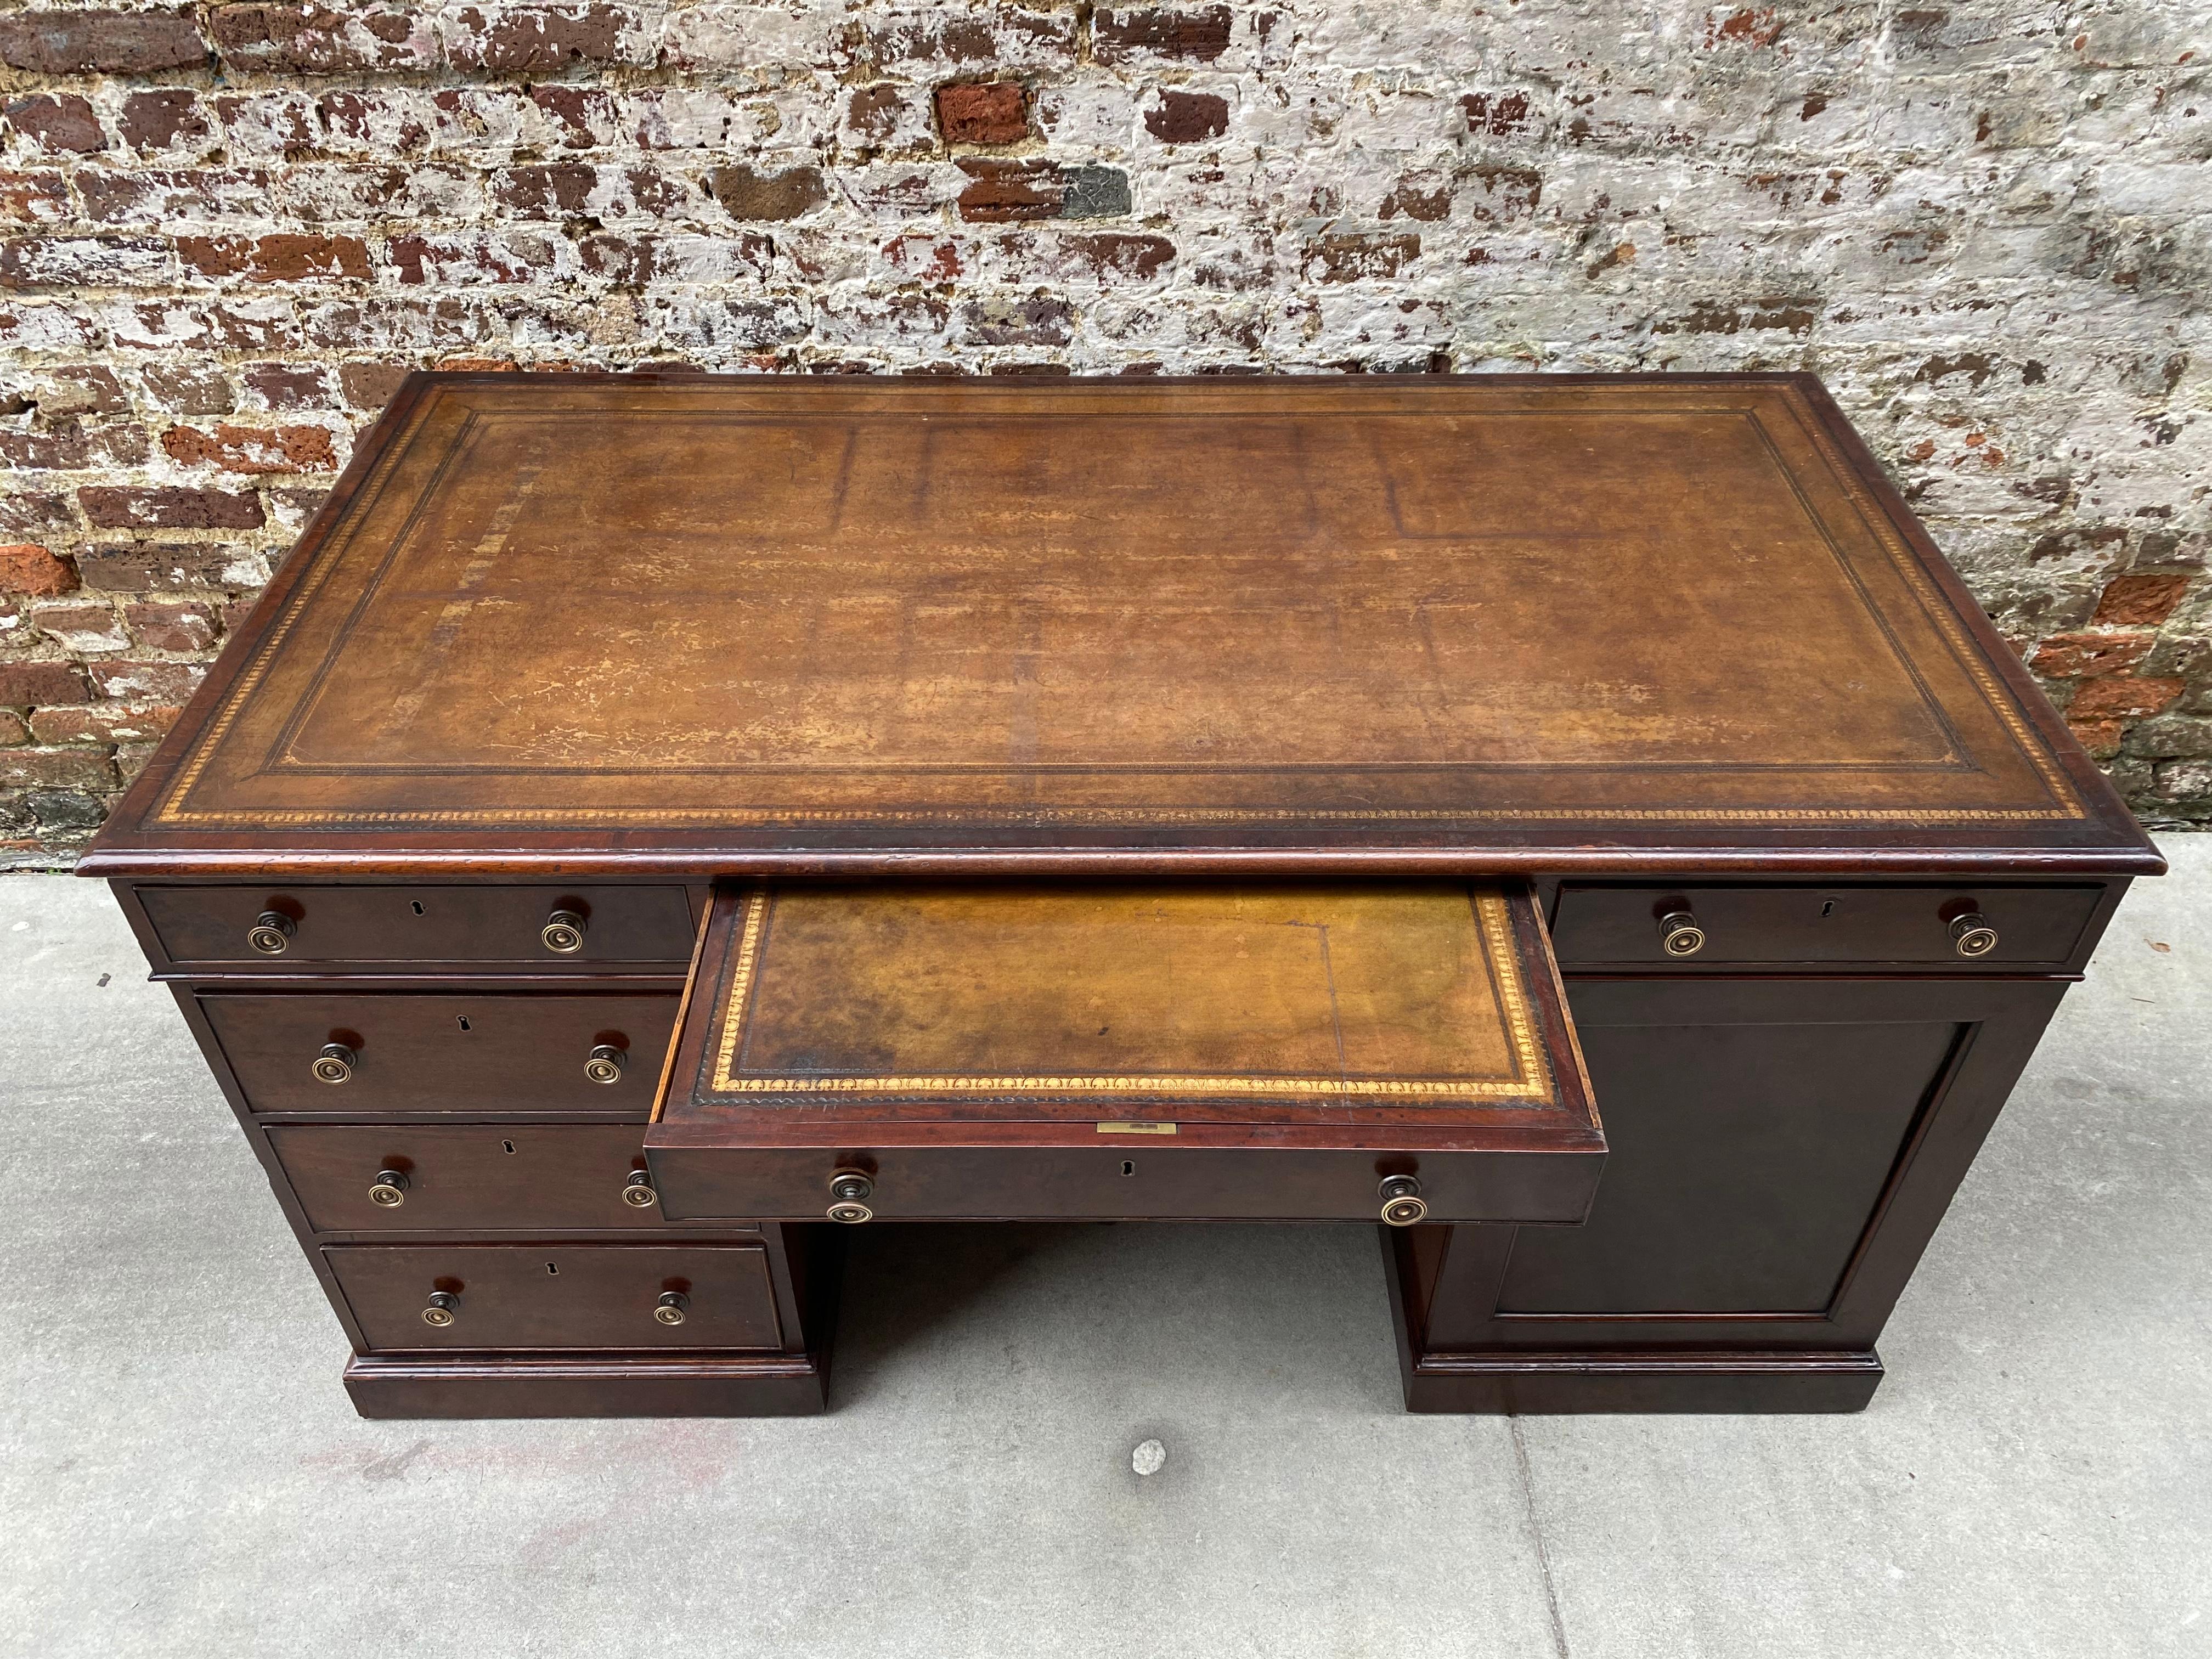 19th century mahogany partners desk with leather writing surface.
Note the unusual height of 33